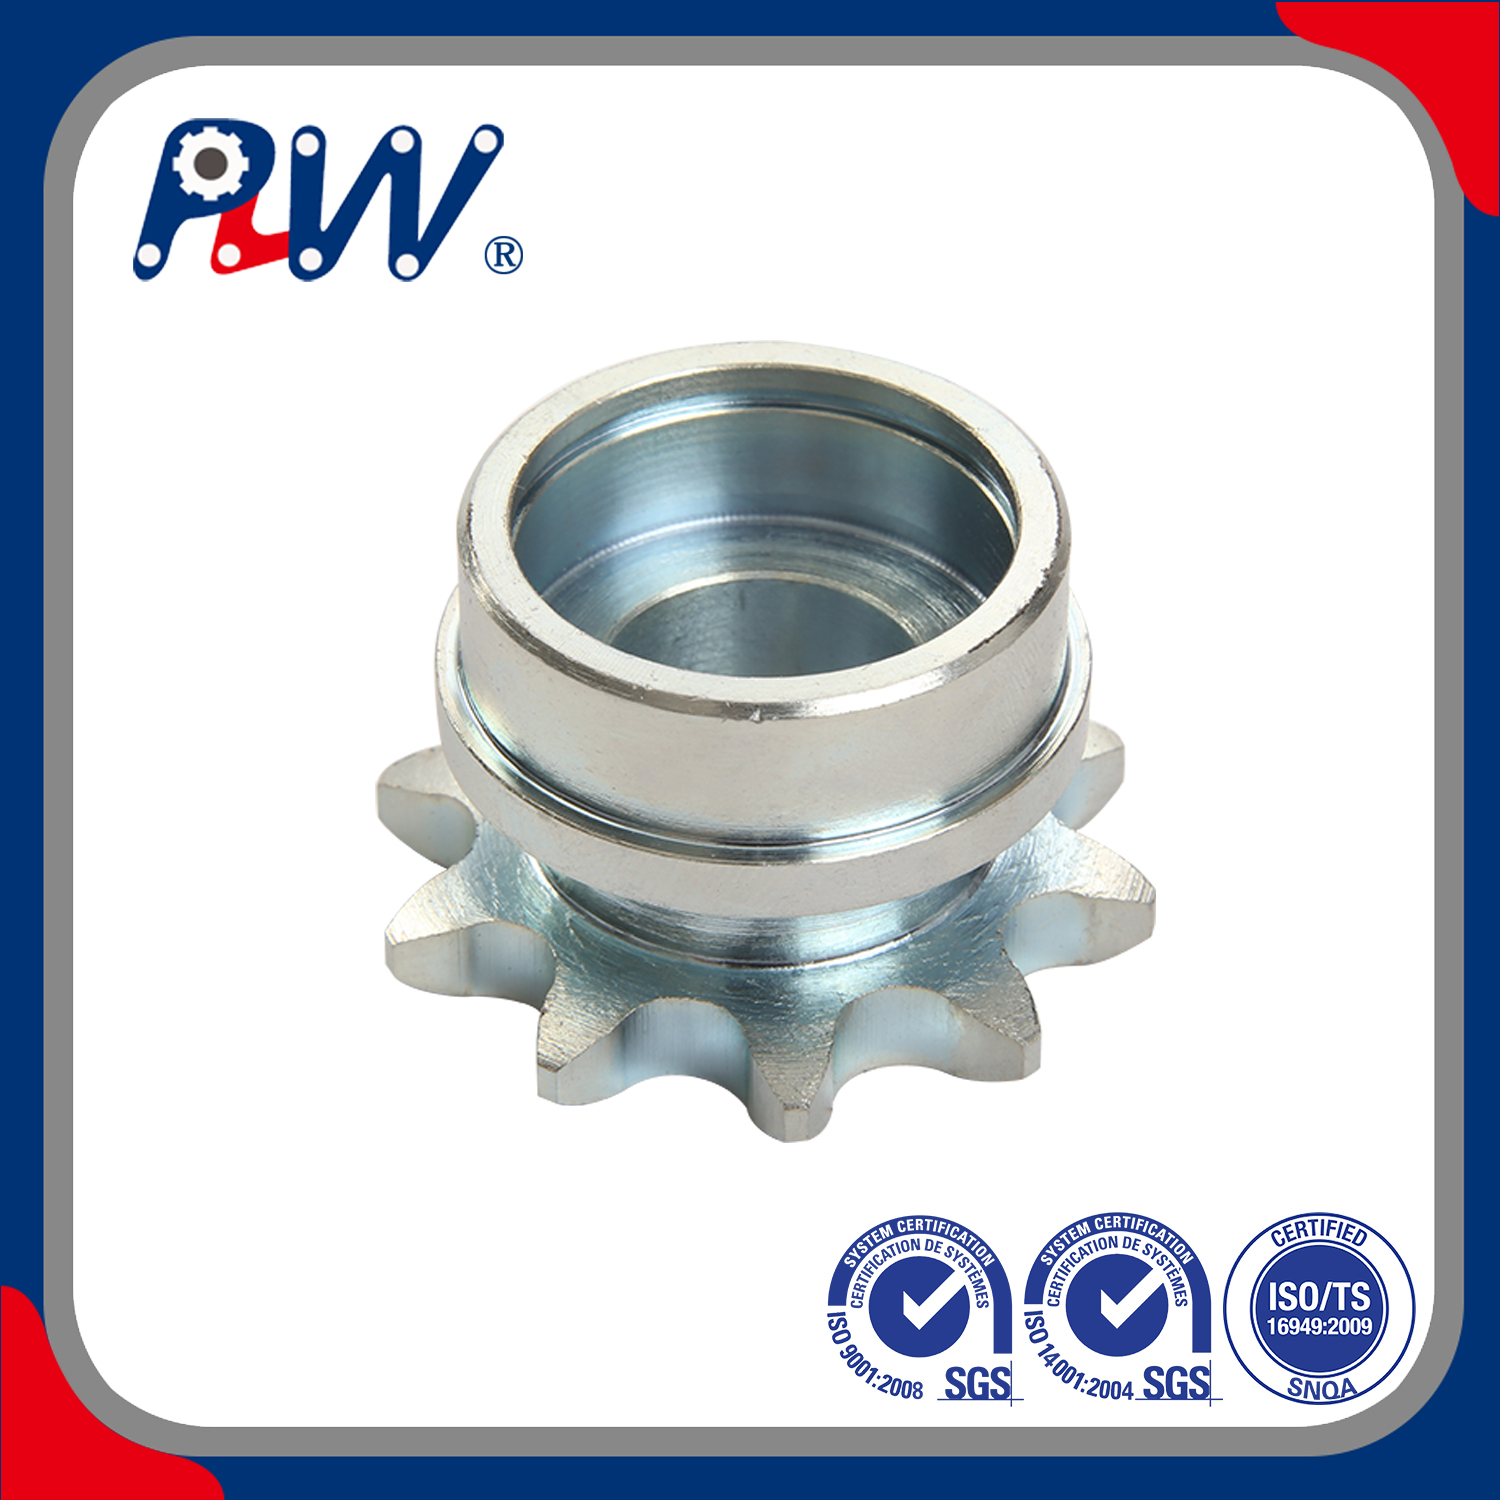 Roller Chain Transmission High-Wearing Feature Made to Order Sprocket with Zinc-Plated Treatment